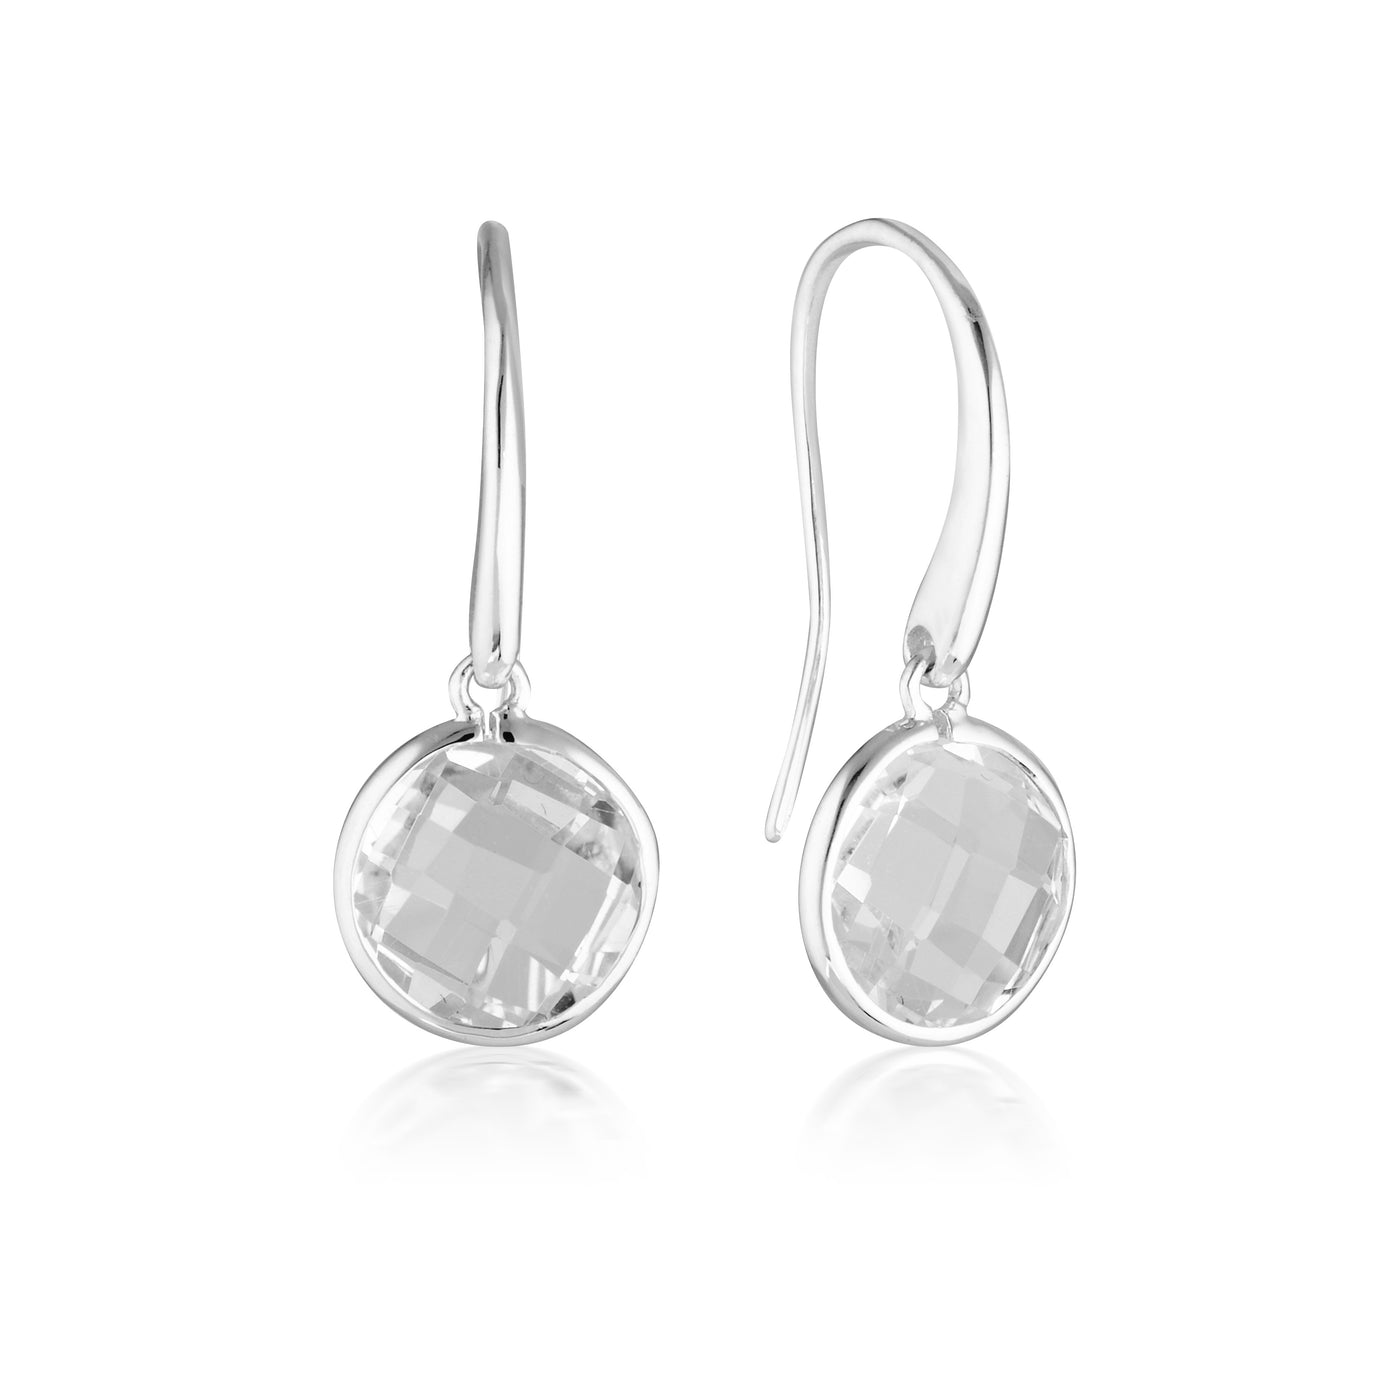 Georgini - Lucent Sterling Silver Cubic Zirconia Drop Earrings Large